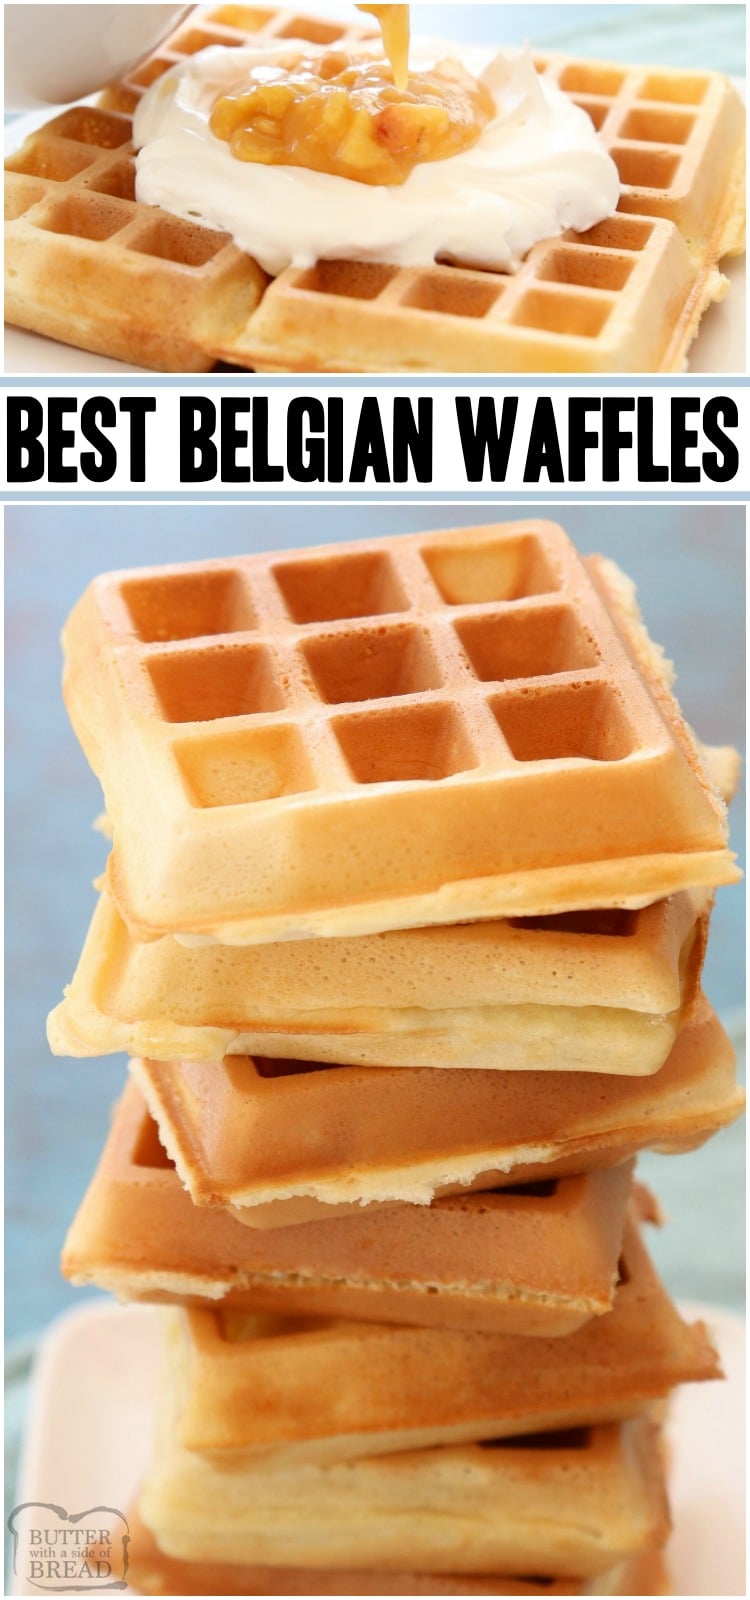 Simply the BEST Belgian Waffle recipe EVER. 4 Tips for PERFECT WAFFLES every time! Crispy Belgian waffles with great flavor & deep grooves, ready for butter & syrup! #waffles #recipe #breakfast #BelgianWaffles #waffle from BUTTER WITH A SIDE OF BREAD